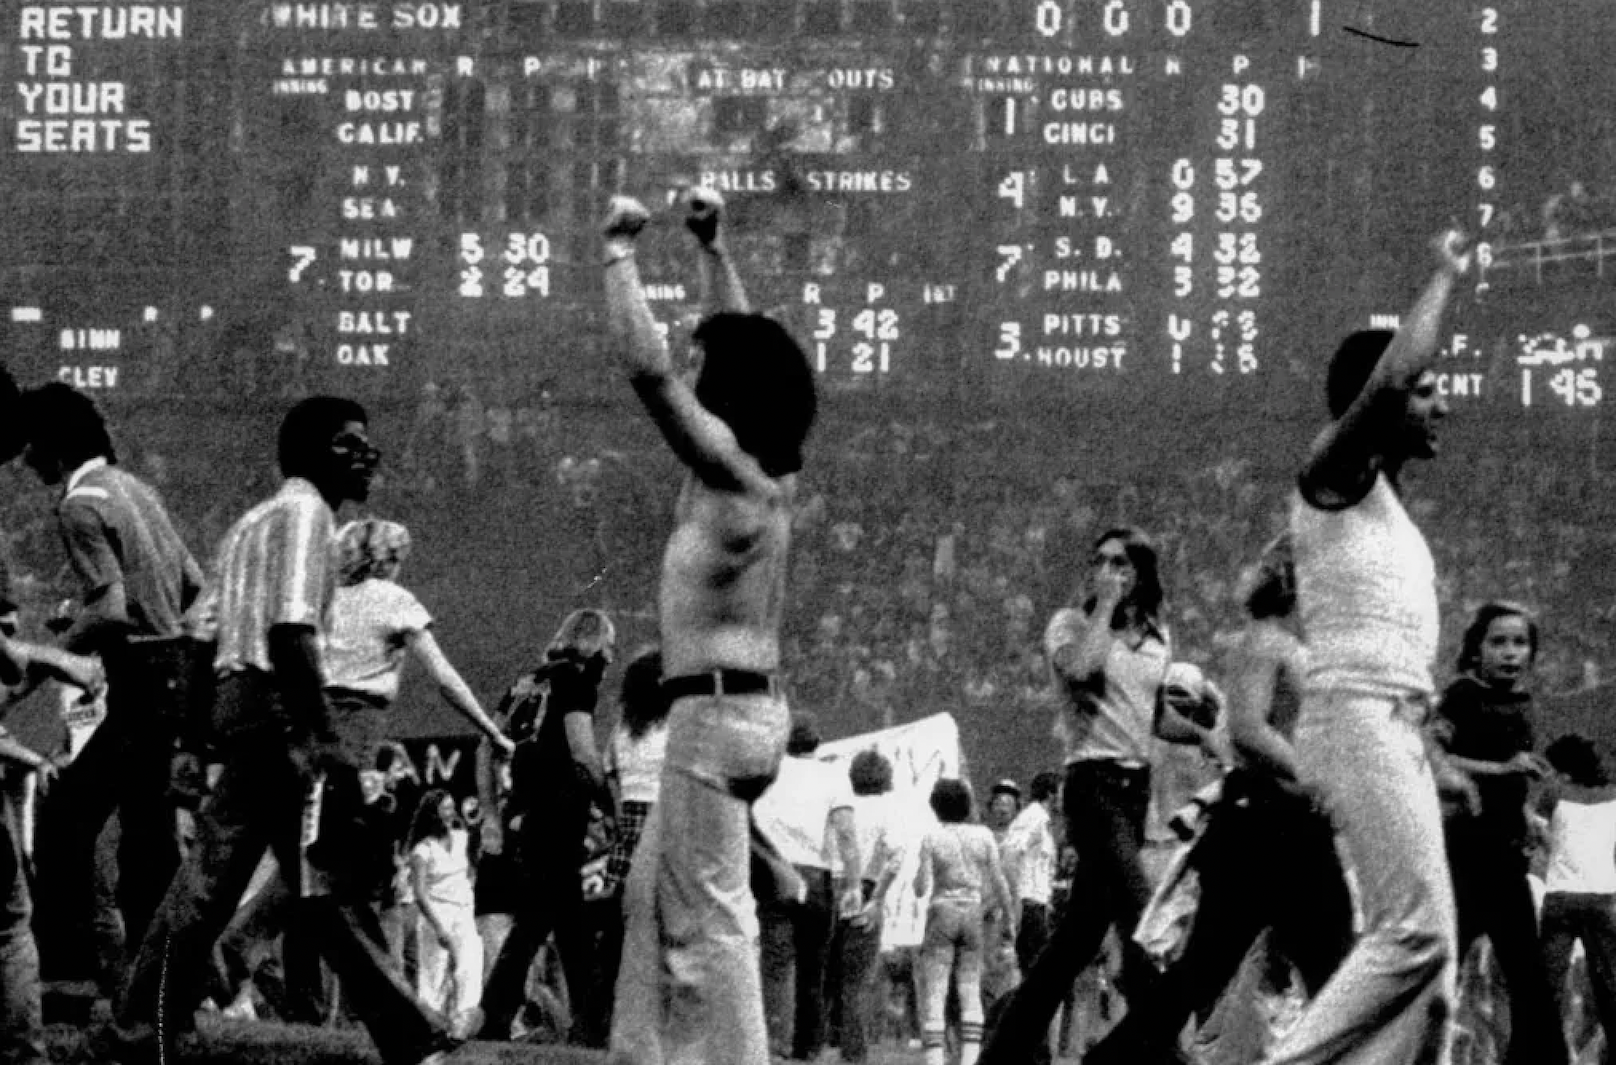 disco demolition night meme - Return To Your Seats White Sox American Bost Calif My. 7. Sea Milw Tor Balt Oak Clev An 57 000 Wationalk Outs Cups 30 Cinci 31 Palls Strikes 057 4 N. Y 9 36 7 S. D. 4 38 Phila 3.42 Pitts 21 3. Noust 5 Cent 145